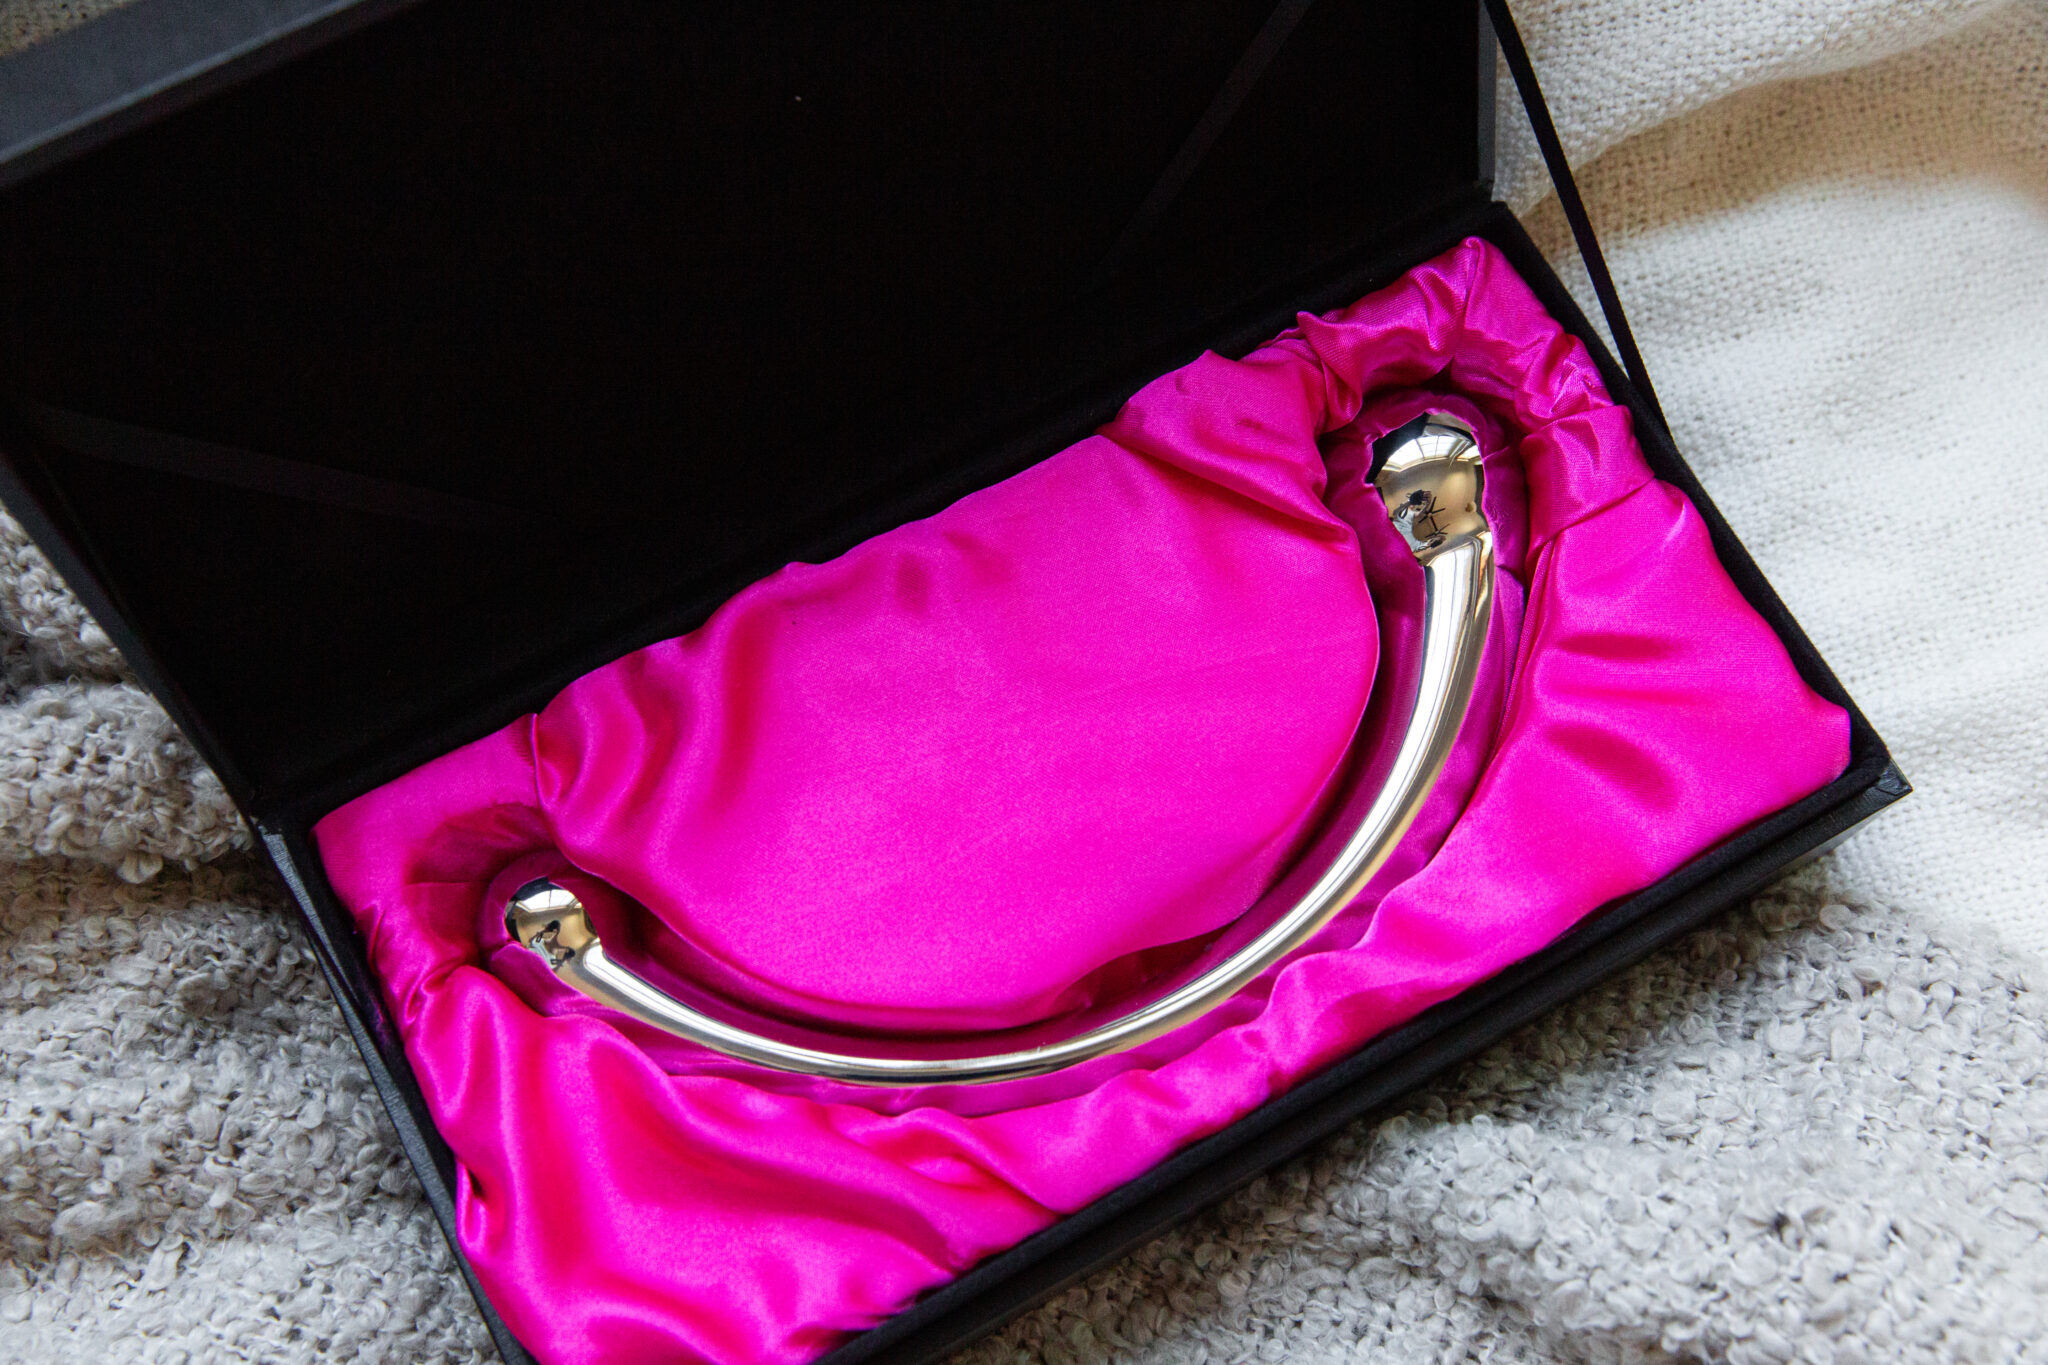 The njoy Pure Wand in its black box, resting on pink silk.